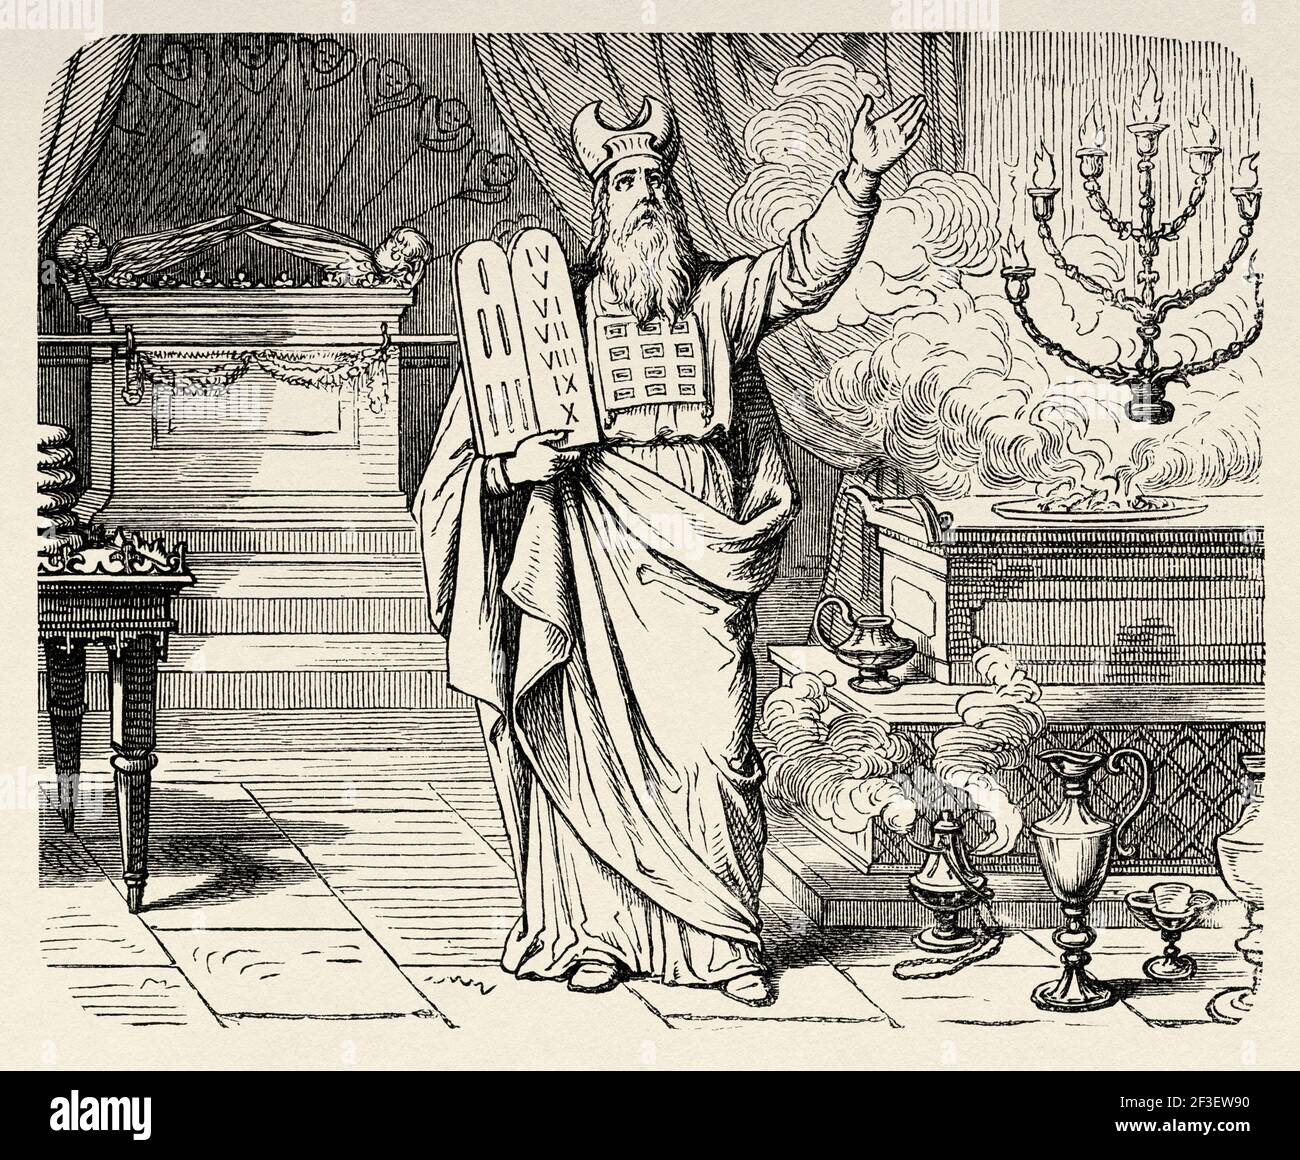 Moses showing the Tables of the Law with the Ten Commandments, Book of Exodus, Old Testament, Old 19th century engraved illustration from History of the Bible 1883 Stock Photo